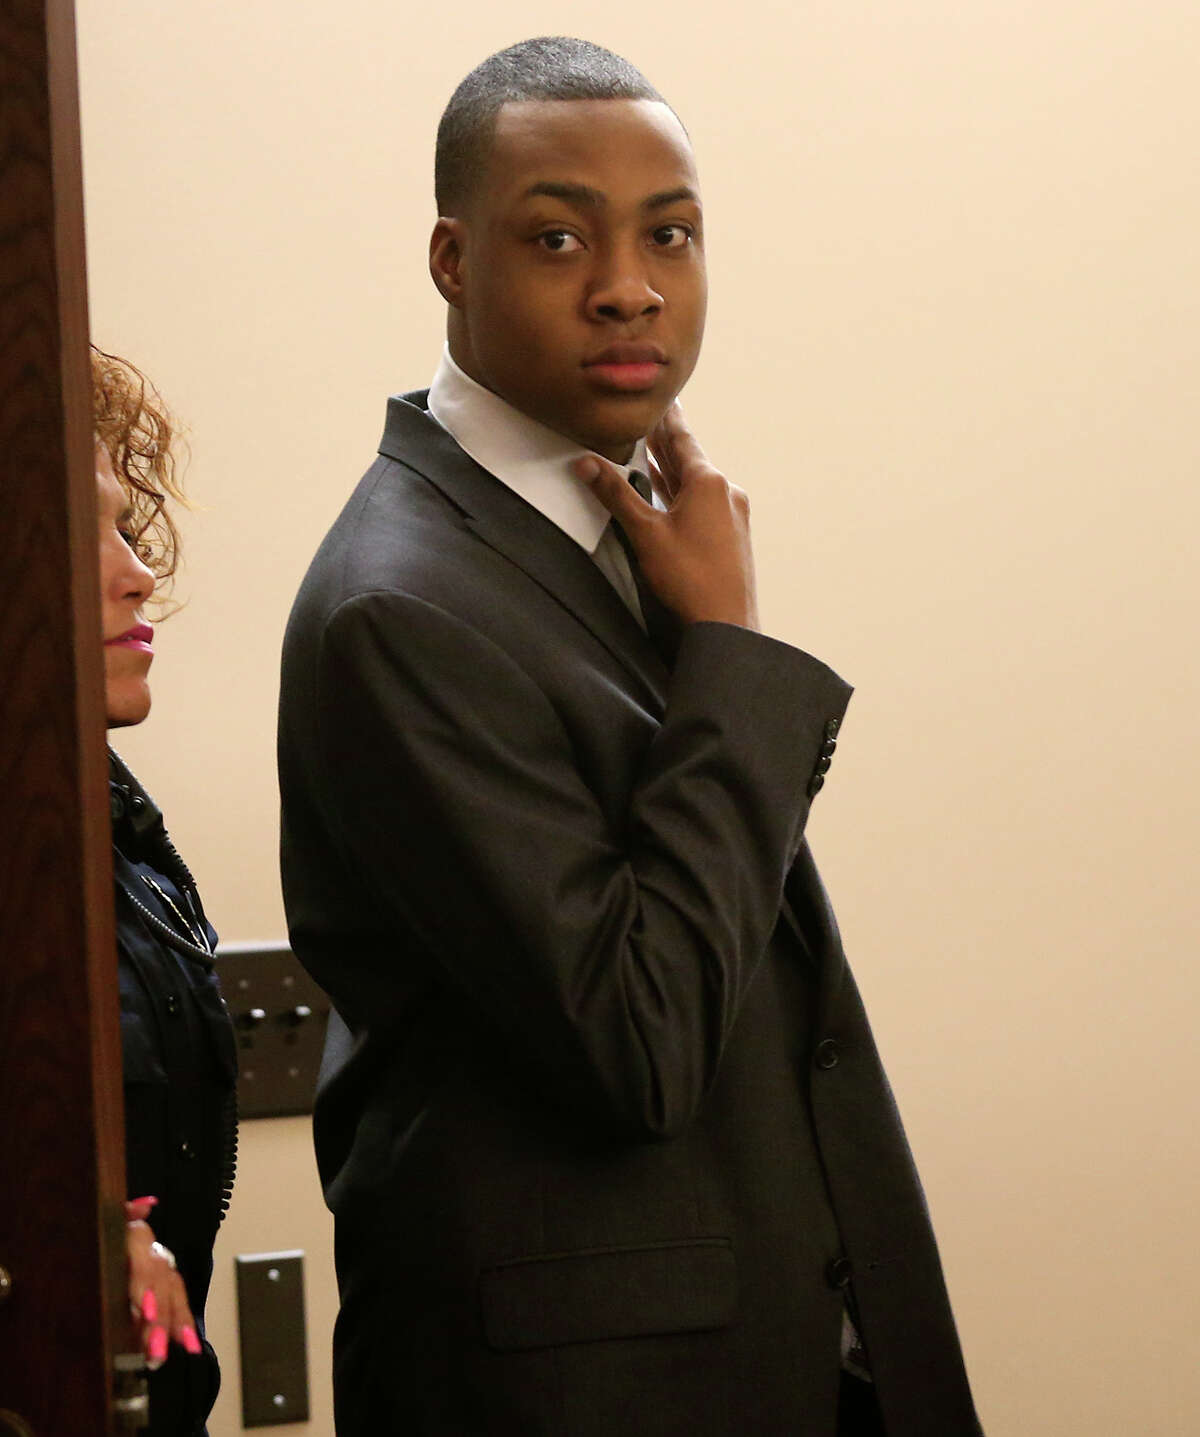 Anthony Johnson, 23, waits for the jury to return after reaching a verdict during his murder trial in the Bexar County 290th District Court, Tuesday, April 9, 2013. A few minutes later, Johnson was found guilty of killing local hip-hop artist, Rodrique Ngande, 21, in November 2011. The punishment phase of the trial will start on Wednesday.